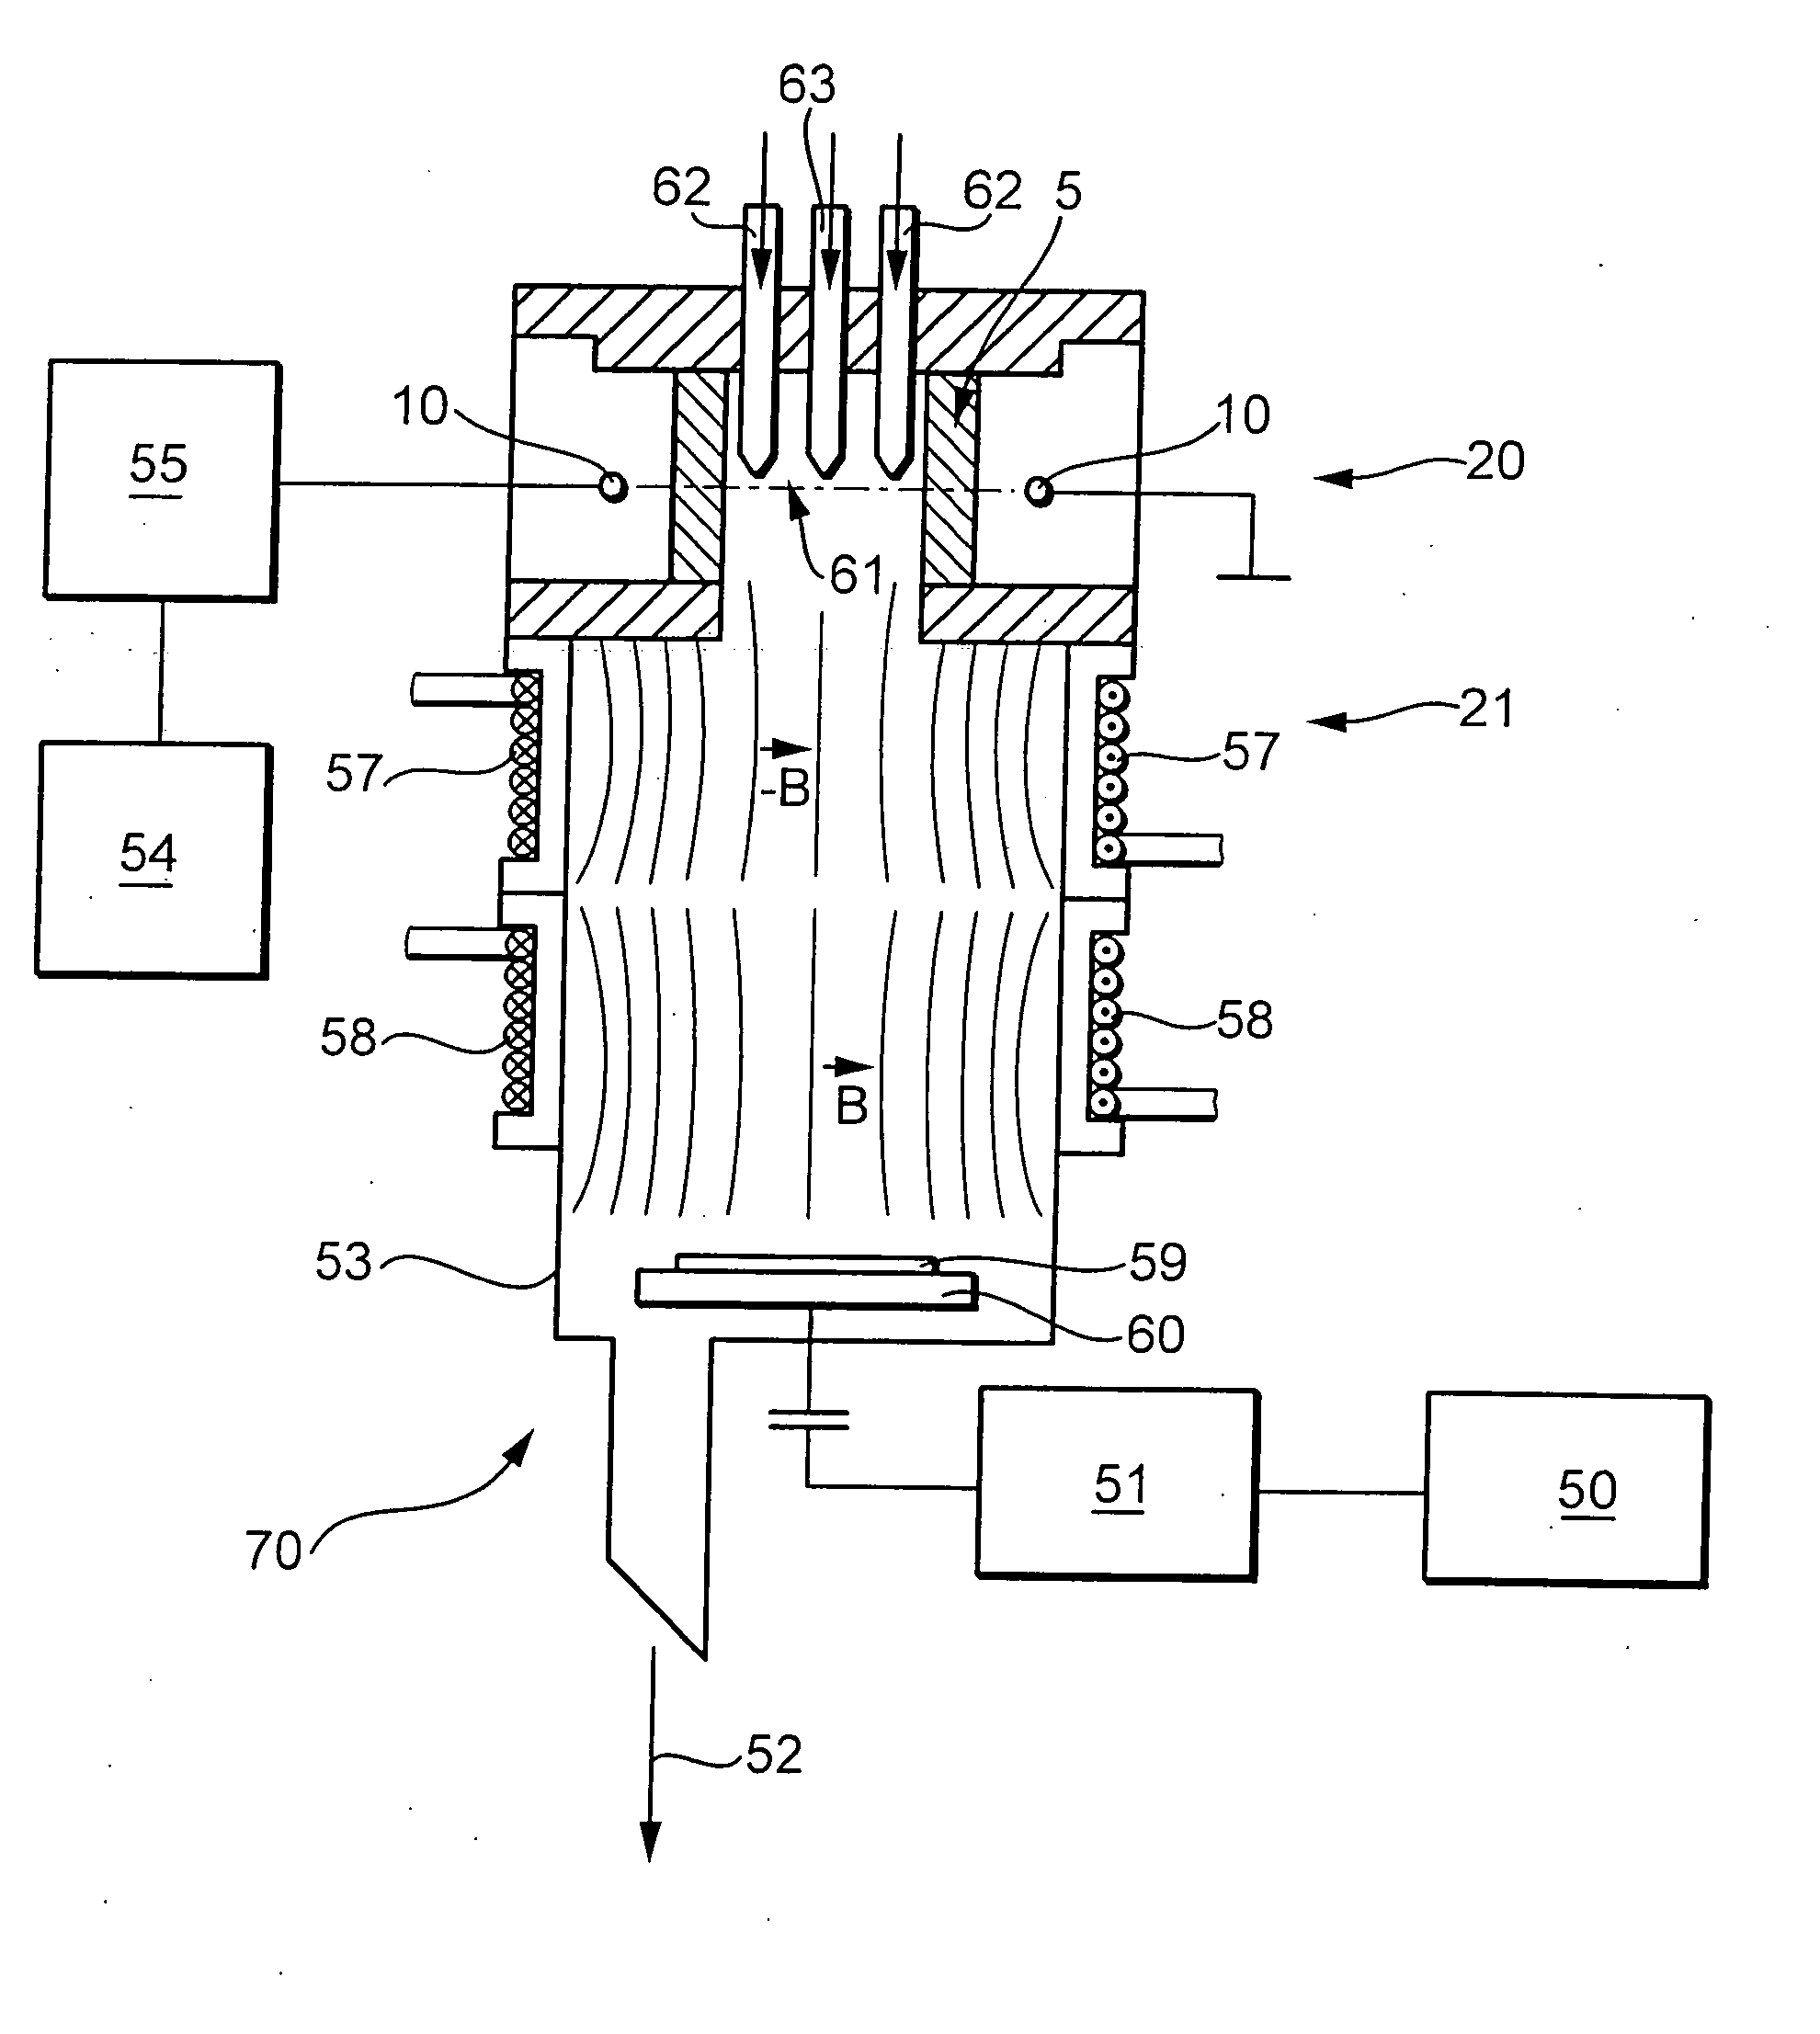 Device and method for anisotropically plasma etching of a substrate, particularly a silicon body